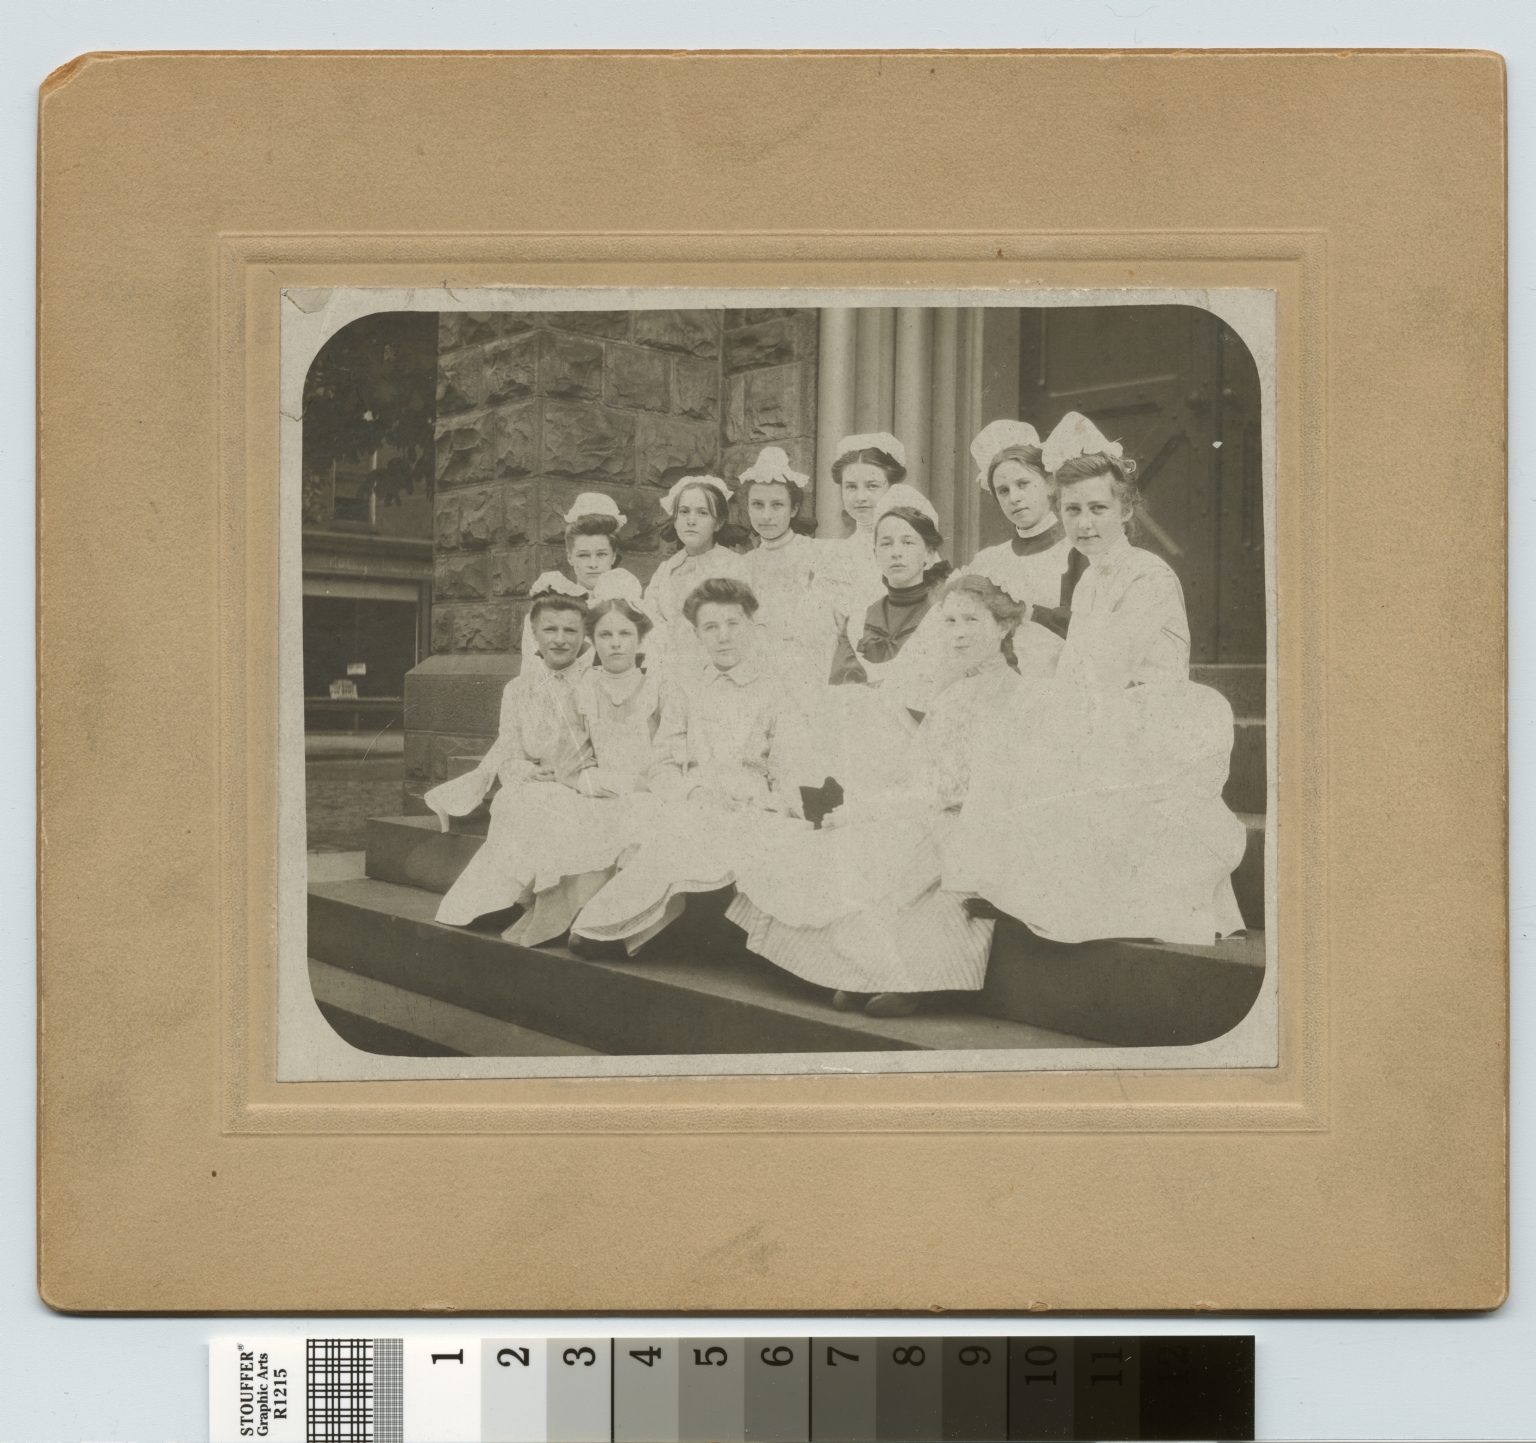 Academics, class photo, group portrait of the eighth grade girls from Rochester public school no. 29, 1906